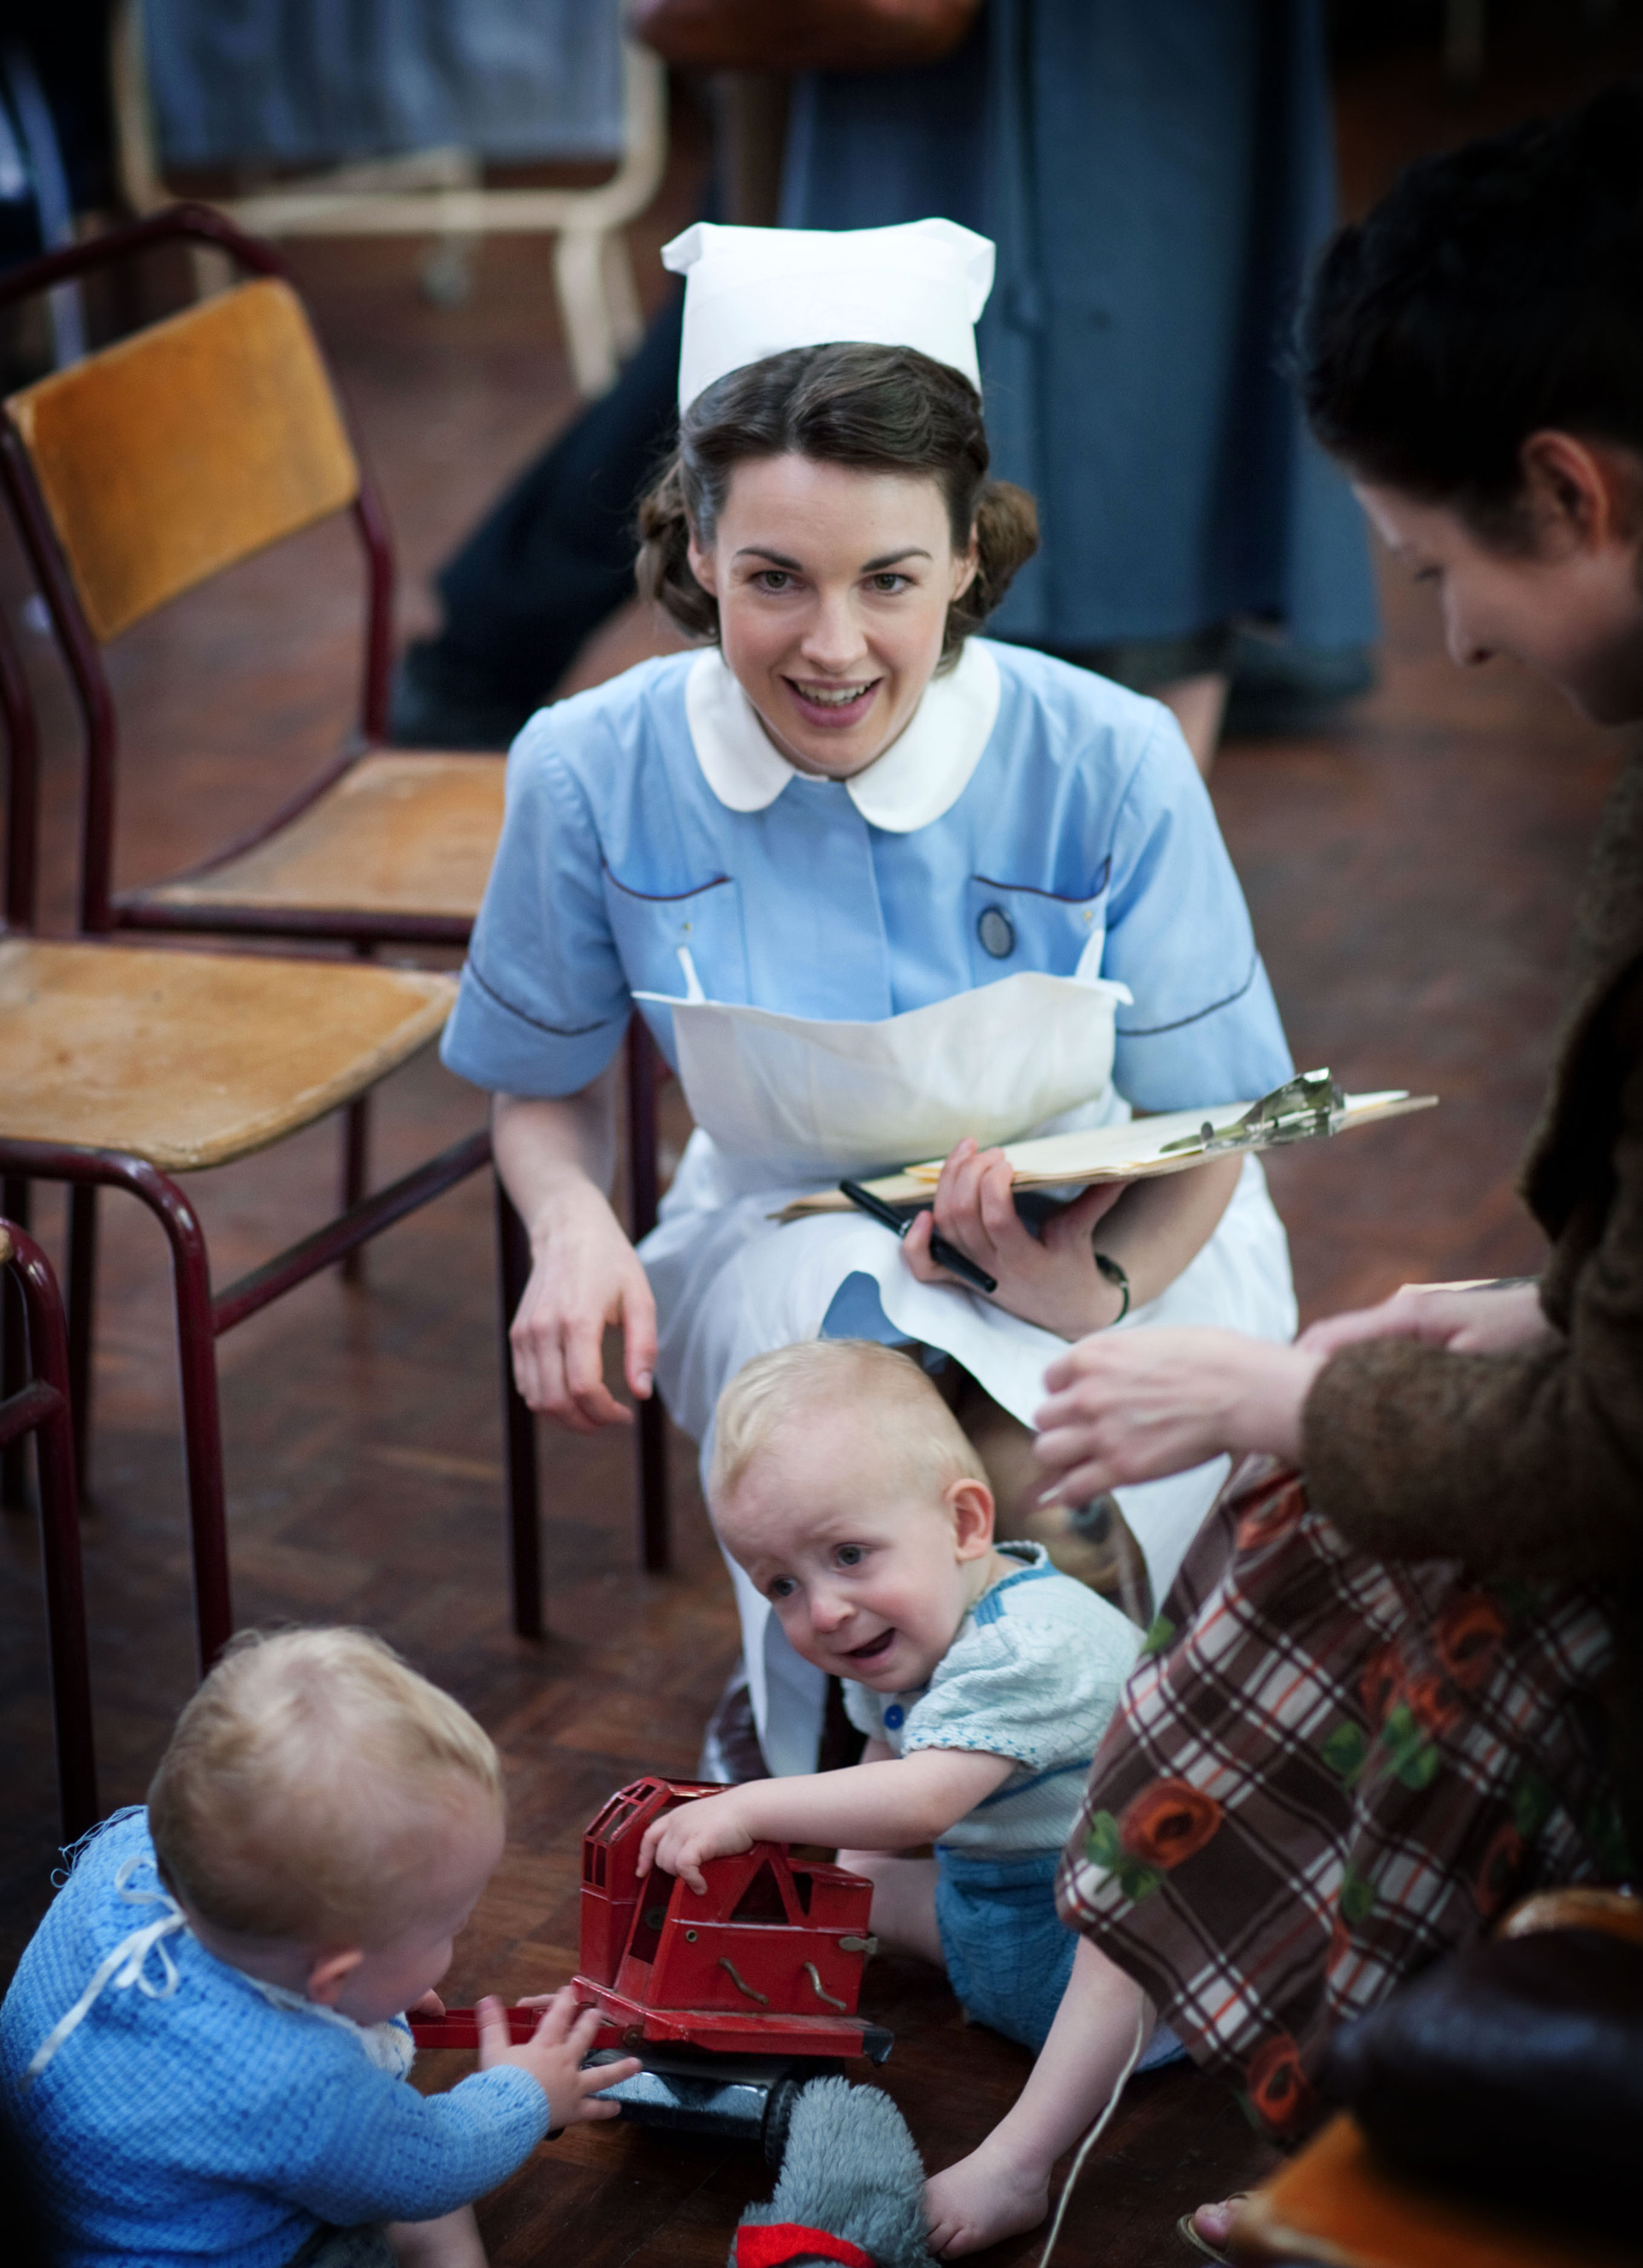 Call the Midwife Season 2 Still Hitting the Mark Modern Midwives picture